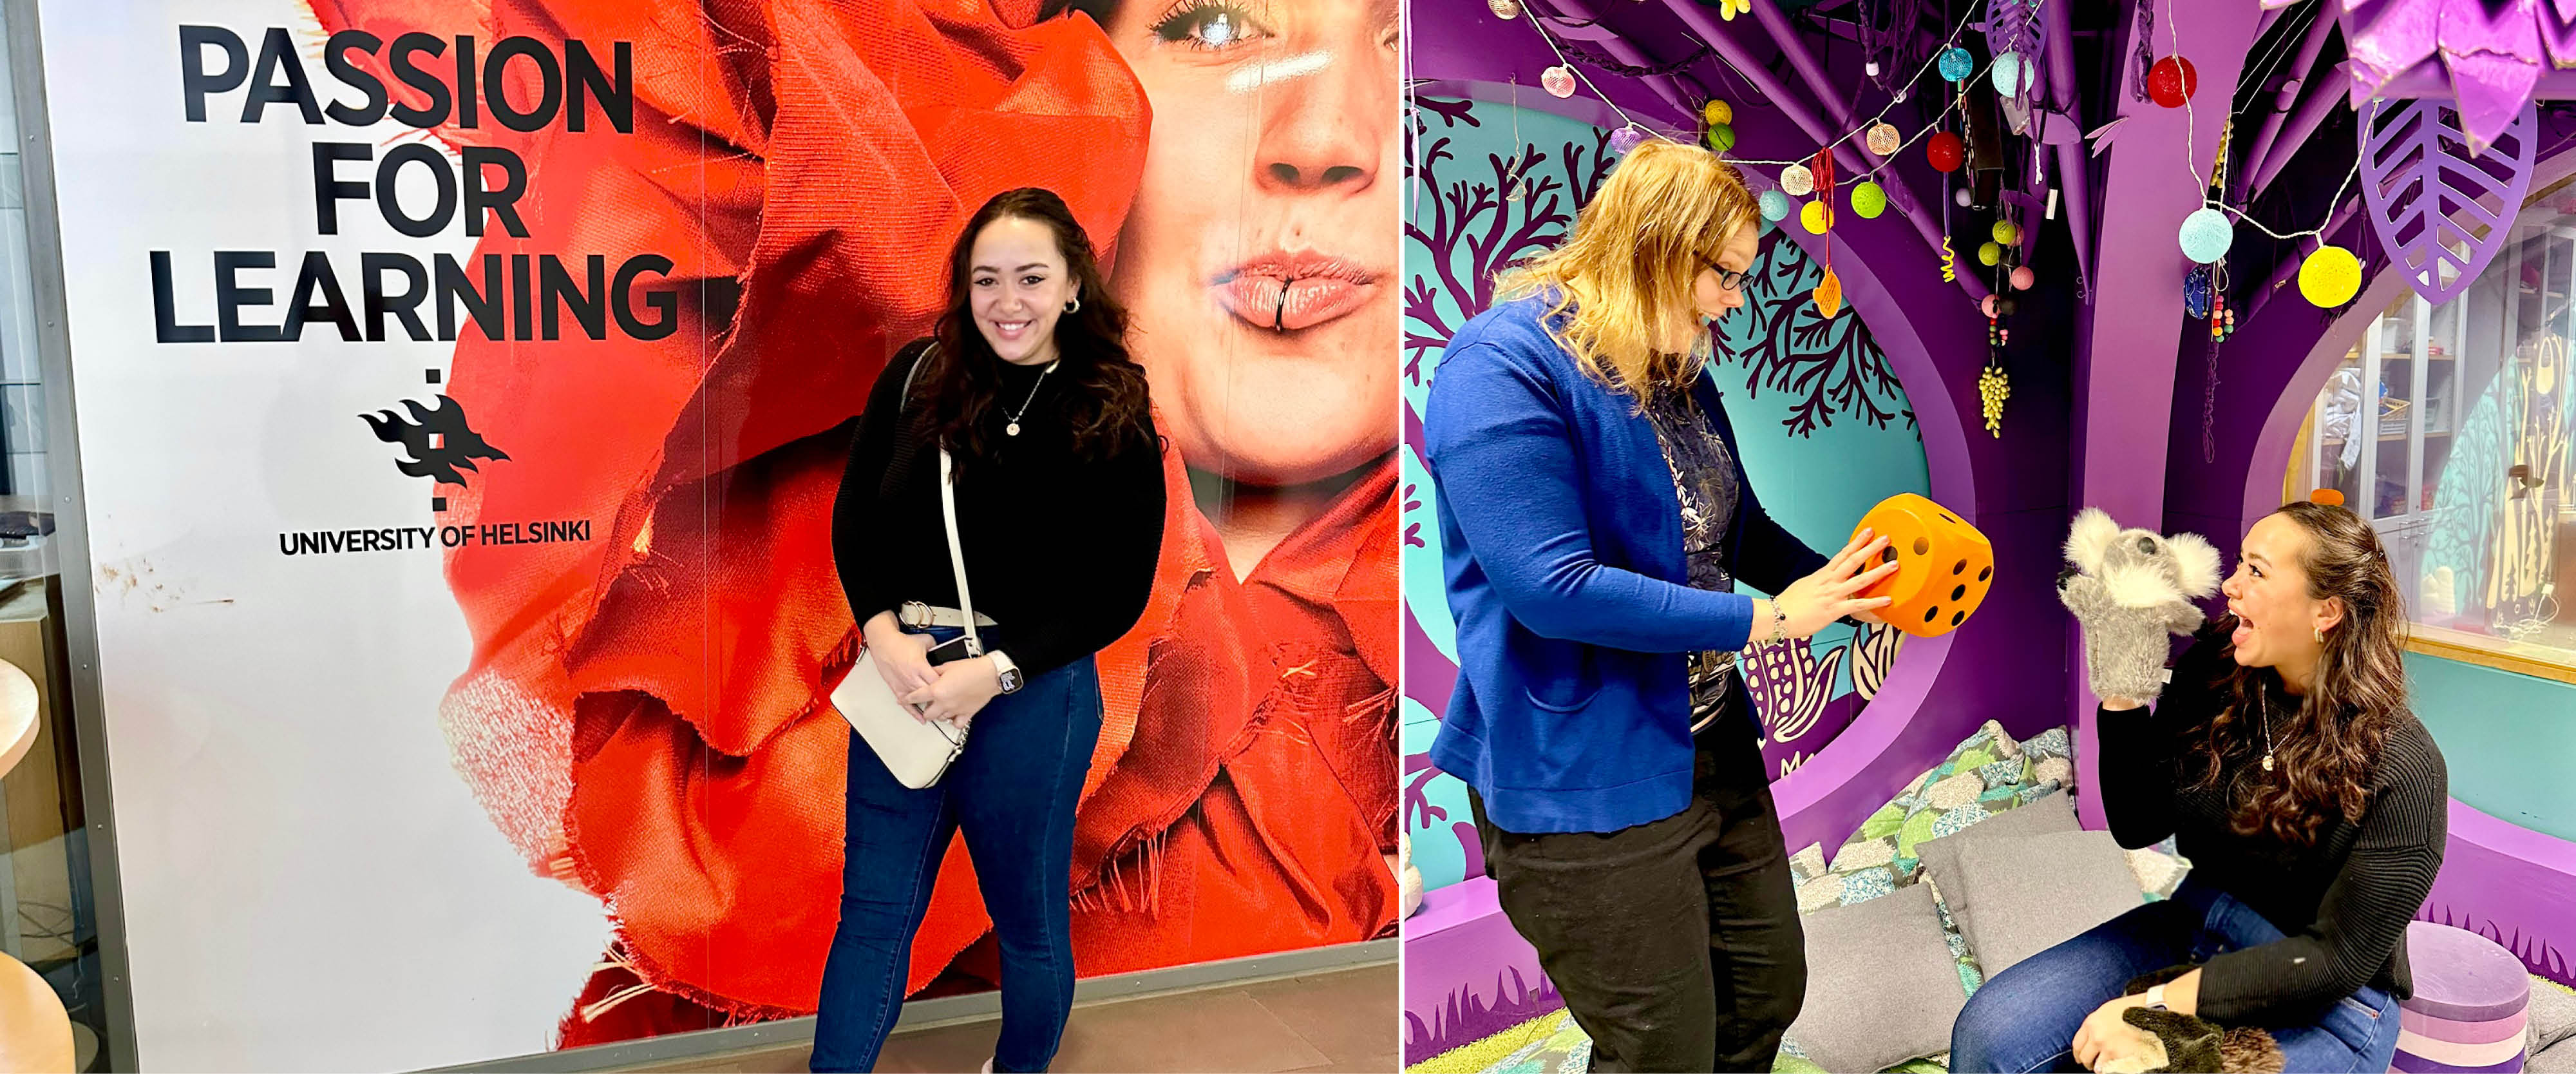 Two photos: on the left, Julia Miller in front of a wall with the logo of the University of Helsinki and the words "Passion for learning". On the right, Julia with her colleague in the University of Helsinki's playcenter, playing with a giant dice and koala hand puppet. They are looking at each other and laughing. 